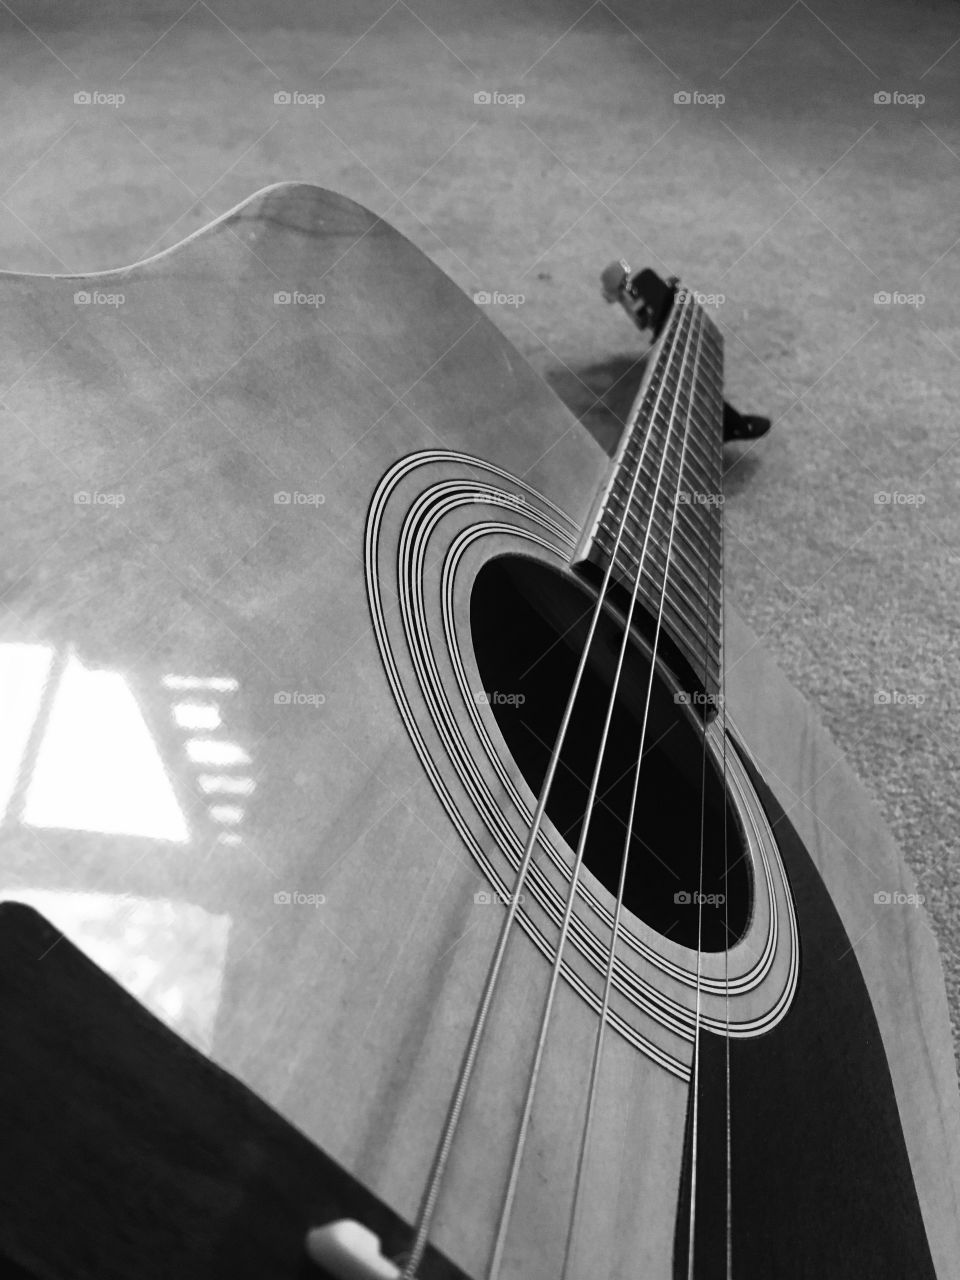 Took a picture of my guitar